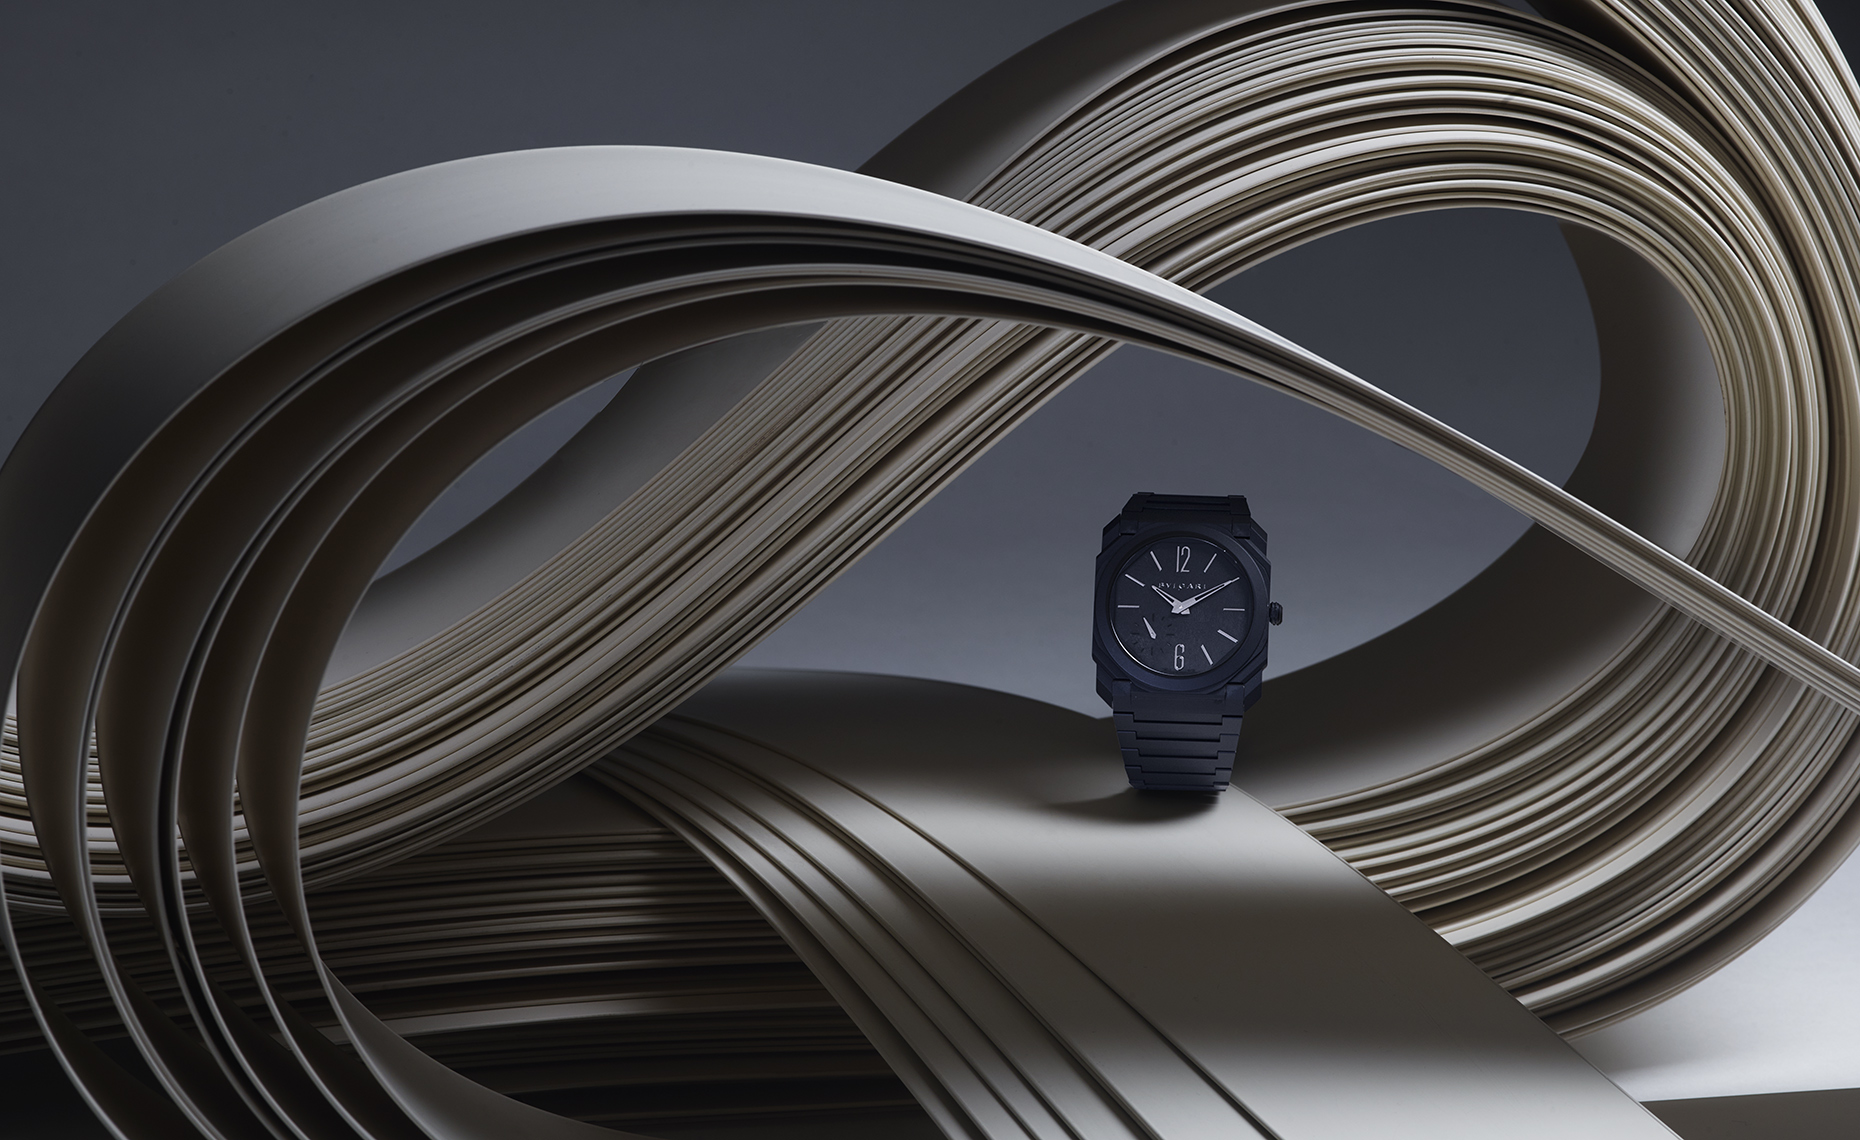 Bell & Ross modern art, fine jewelry and watch photography by David Lewis Taylor.